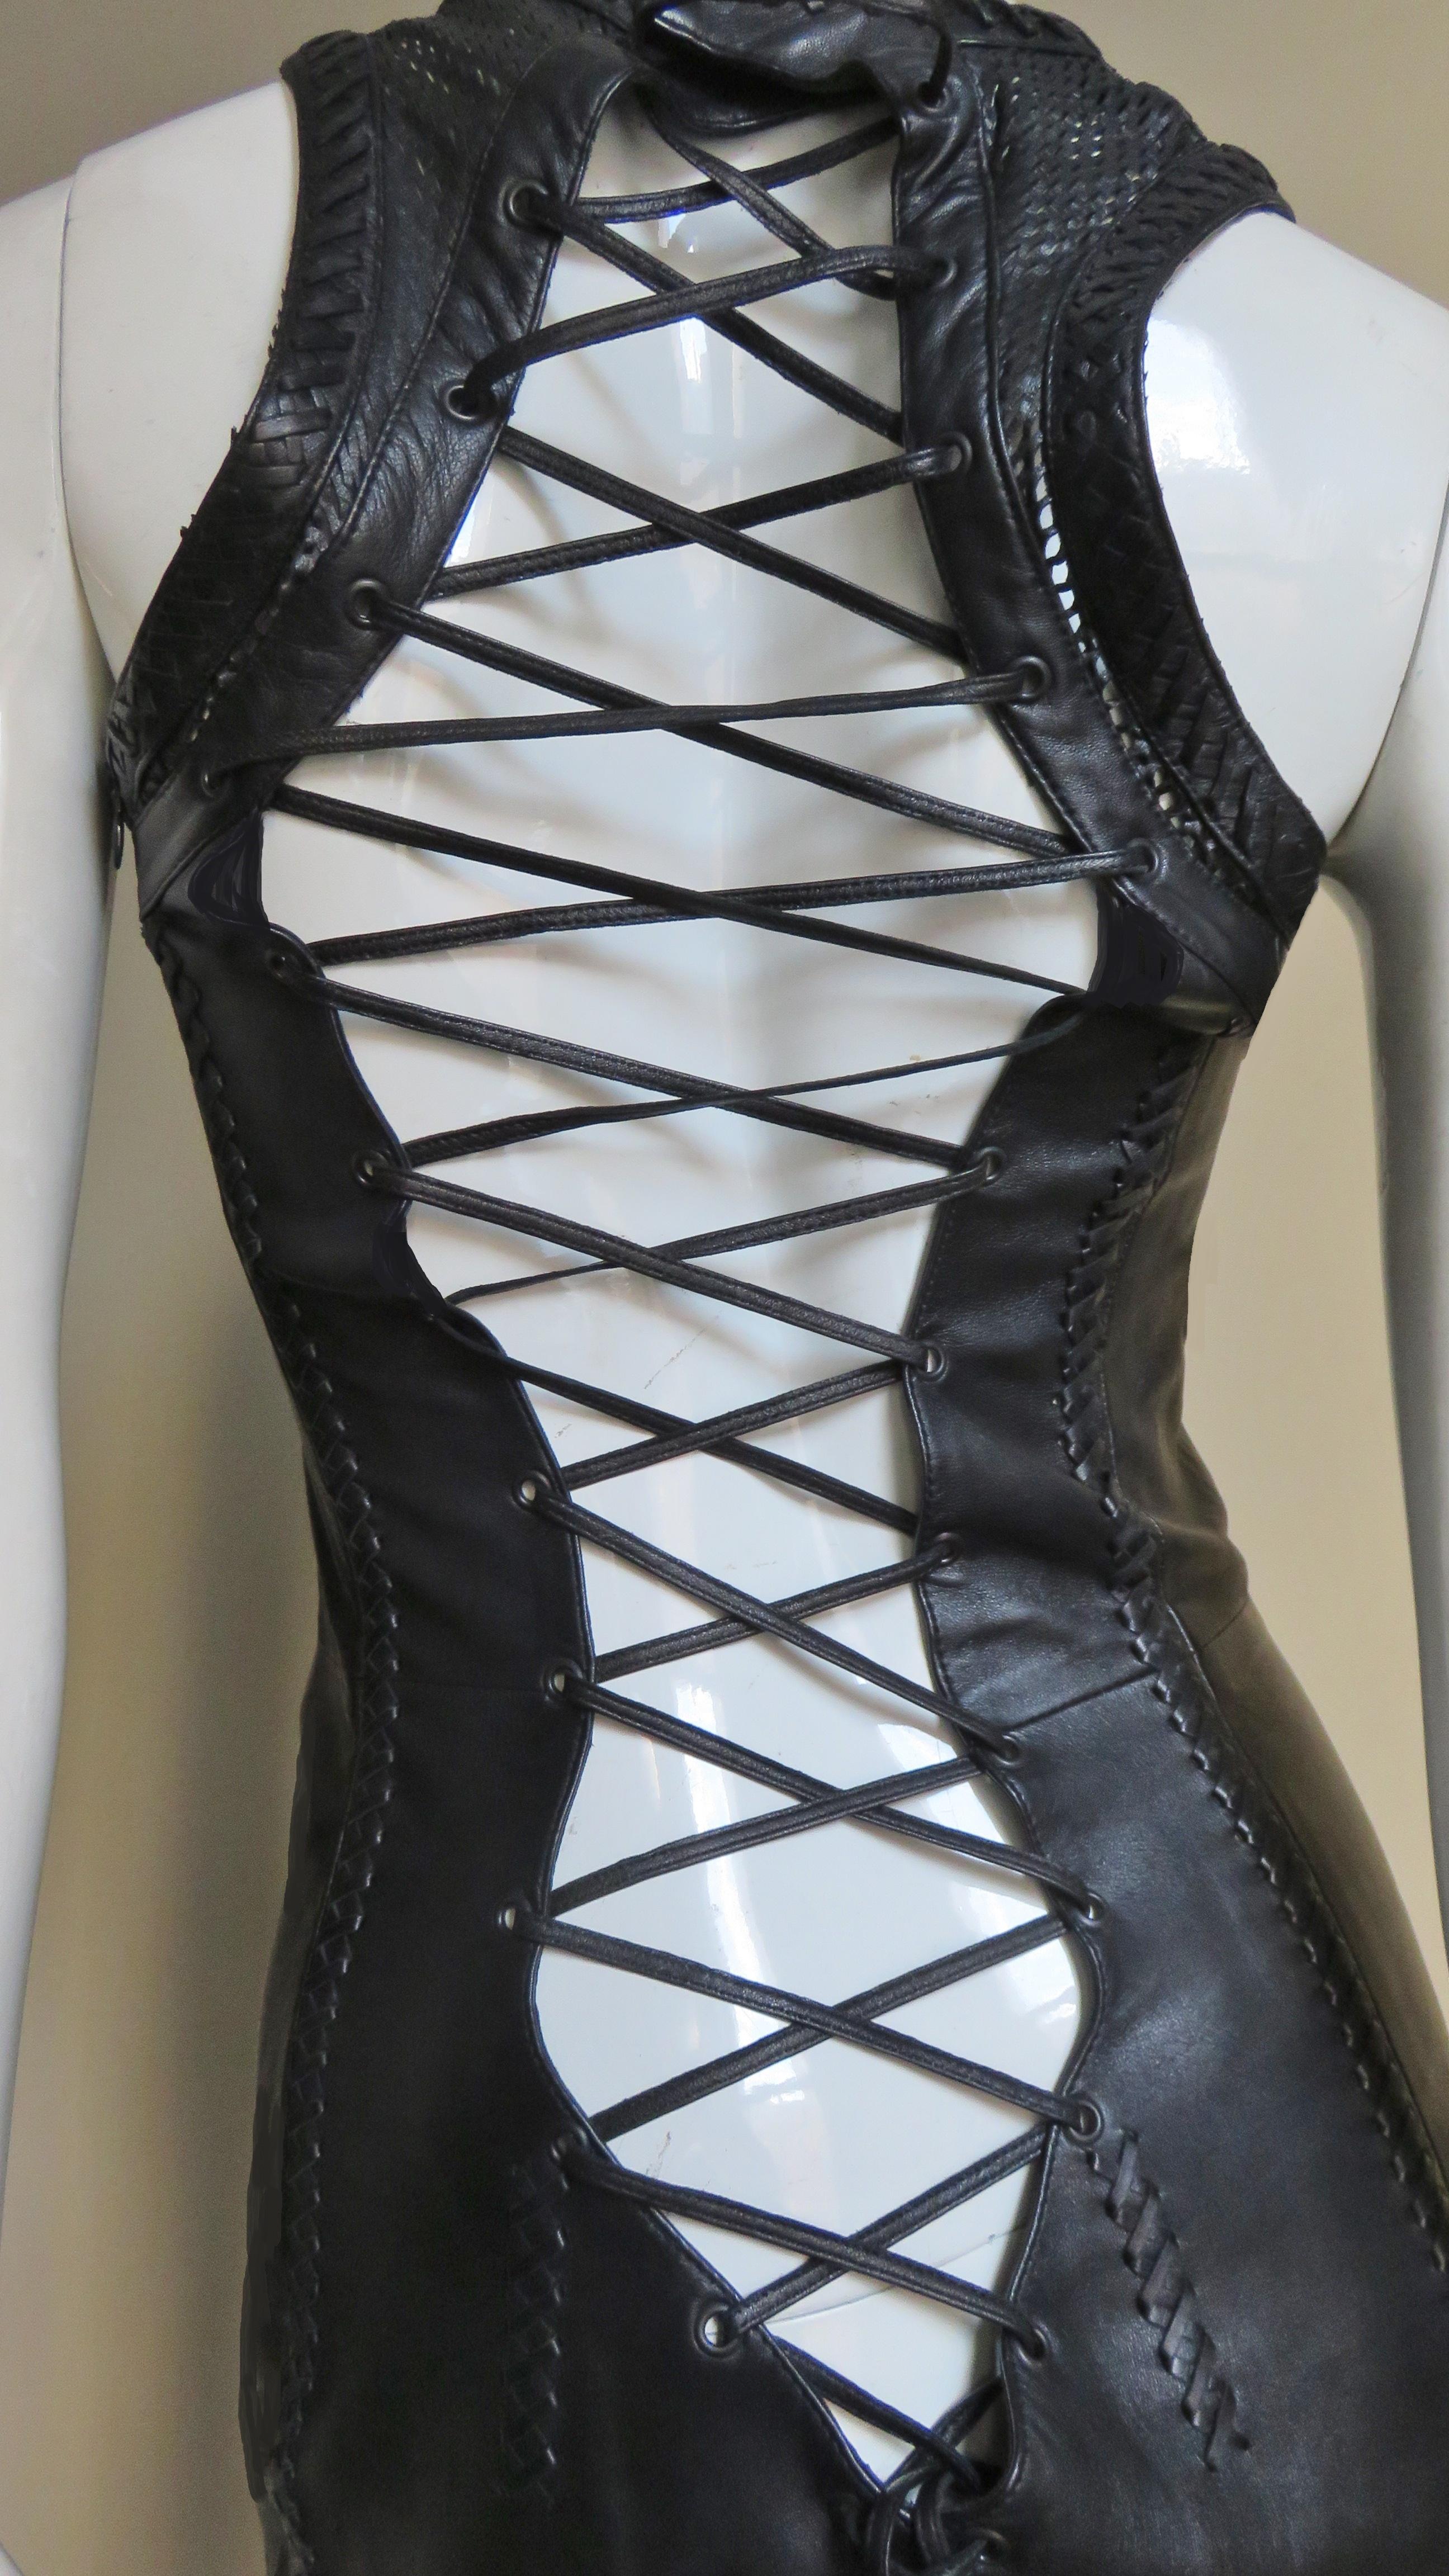  Gianni Versace Leather Lace up Dress S/S 2002 For Sale 8